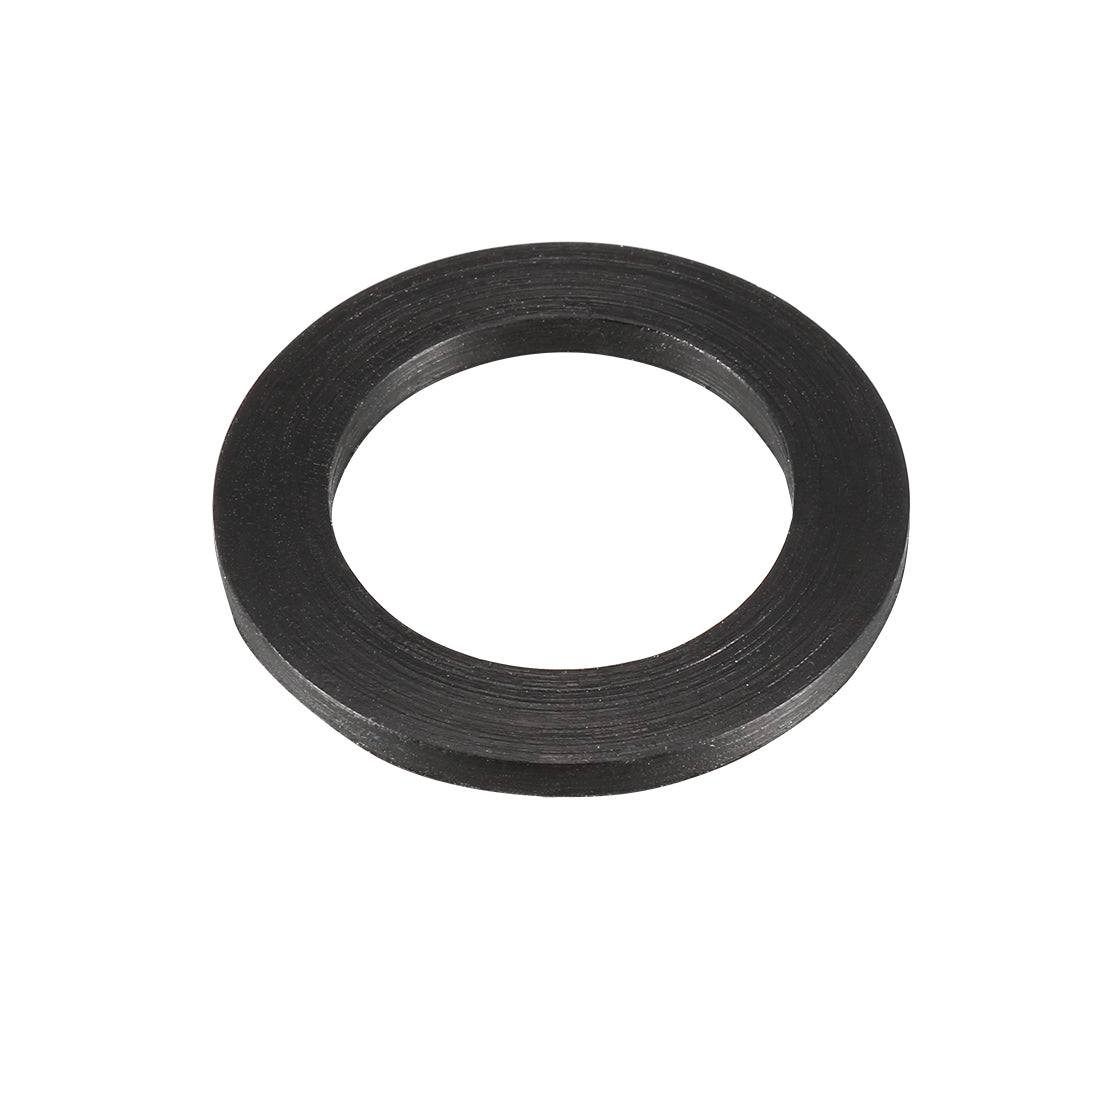 uxcell Uxcell Rubber Round Flat Washer Assortment Size Flat Washers, Black Pack of 10